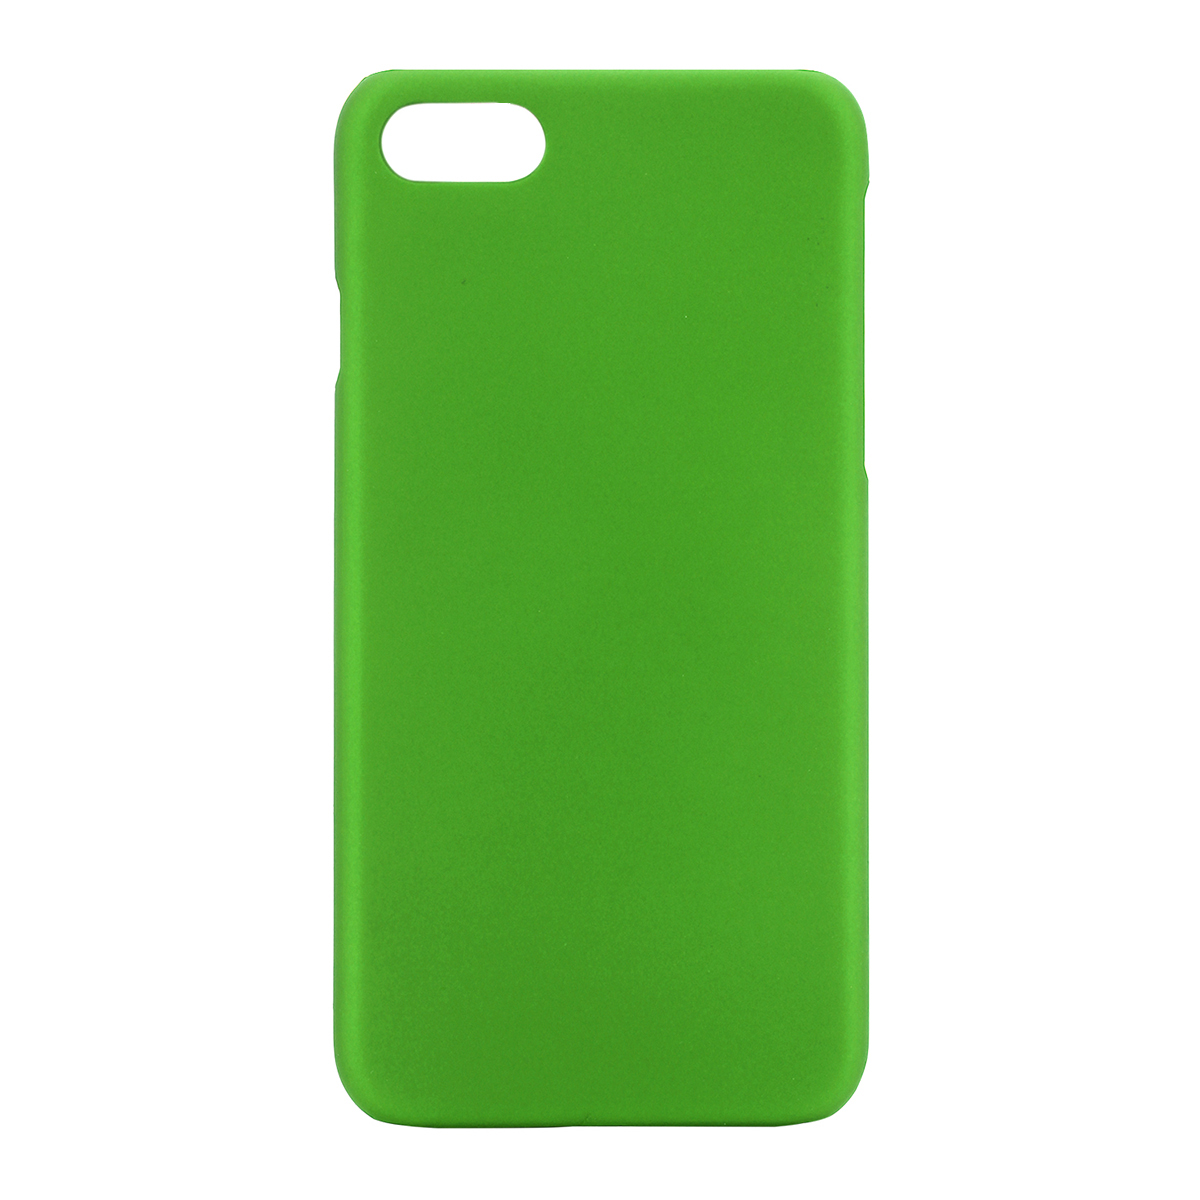 Multicolor Frosted Hard PC Protective Back Phone Case for iPhone 6s - Green